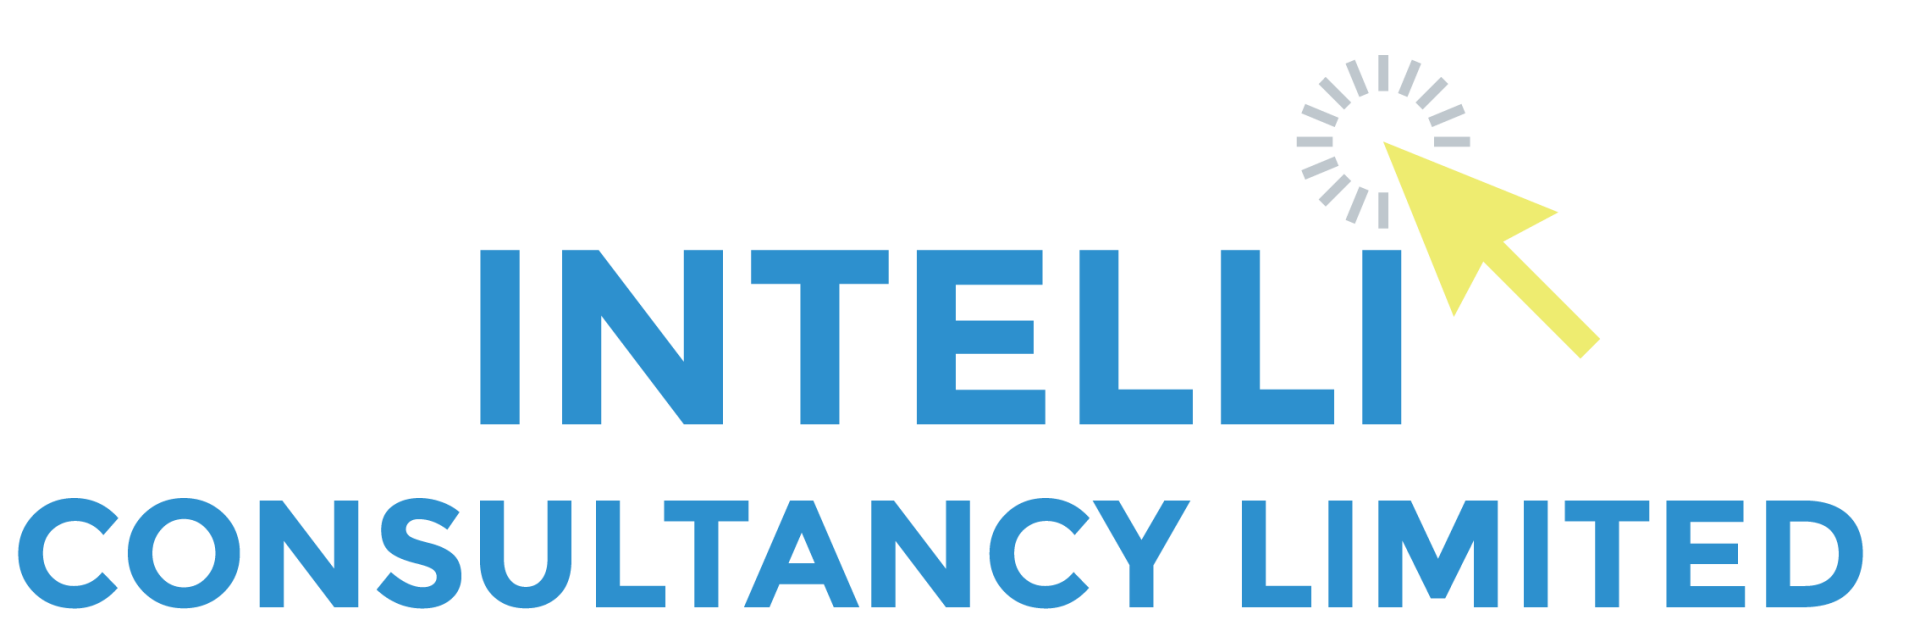 Intelli Consultancy Limited logo